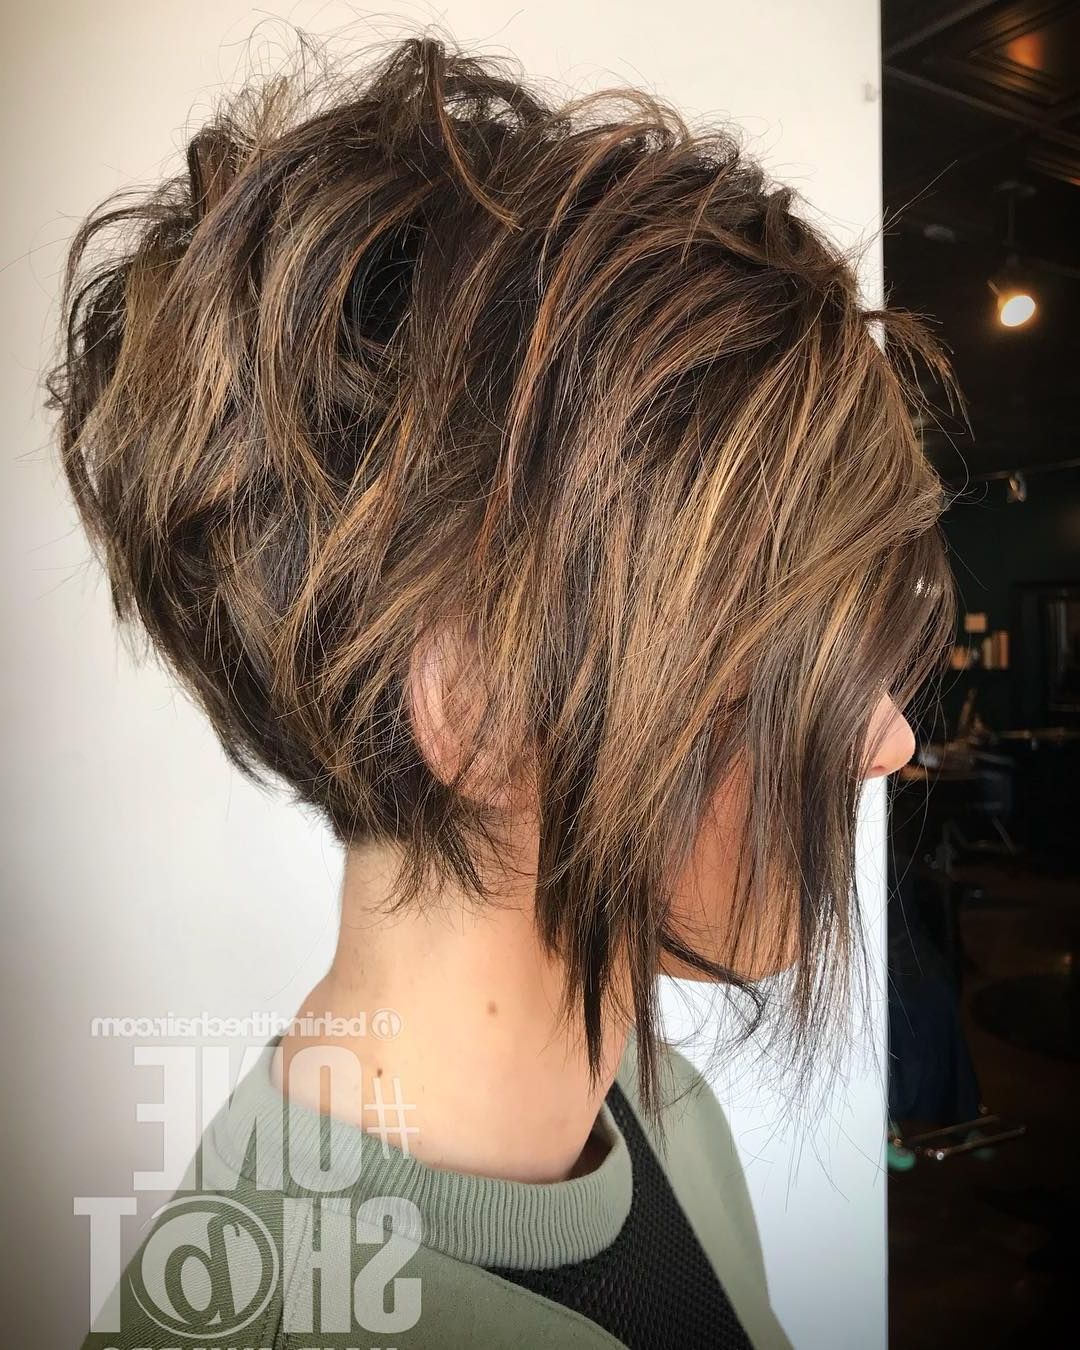 2017 Trendy Messy Bob Hairstyles Pertaining To 8+ Messy Bob Short Hairstyles For Girls (View 2 of 20)